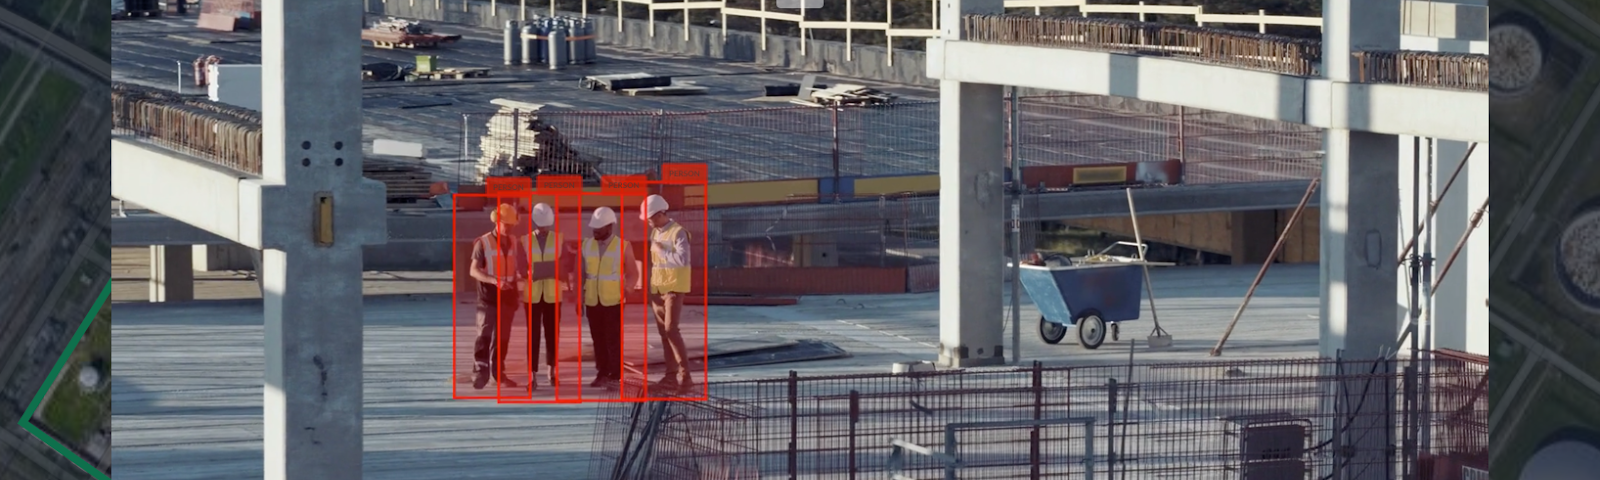 Figure 9: Real-time object detection (workers on a construction site) streamed directly from the drone to UAVIA’s web application. All the image processing, drone navigation, and object detection inference are processed in the autonomous drone.